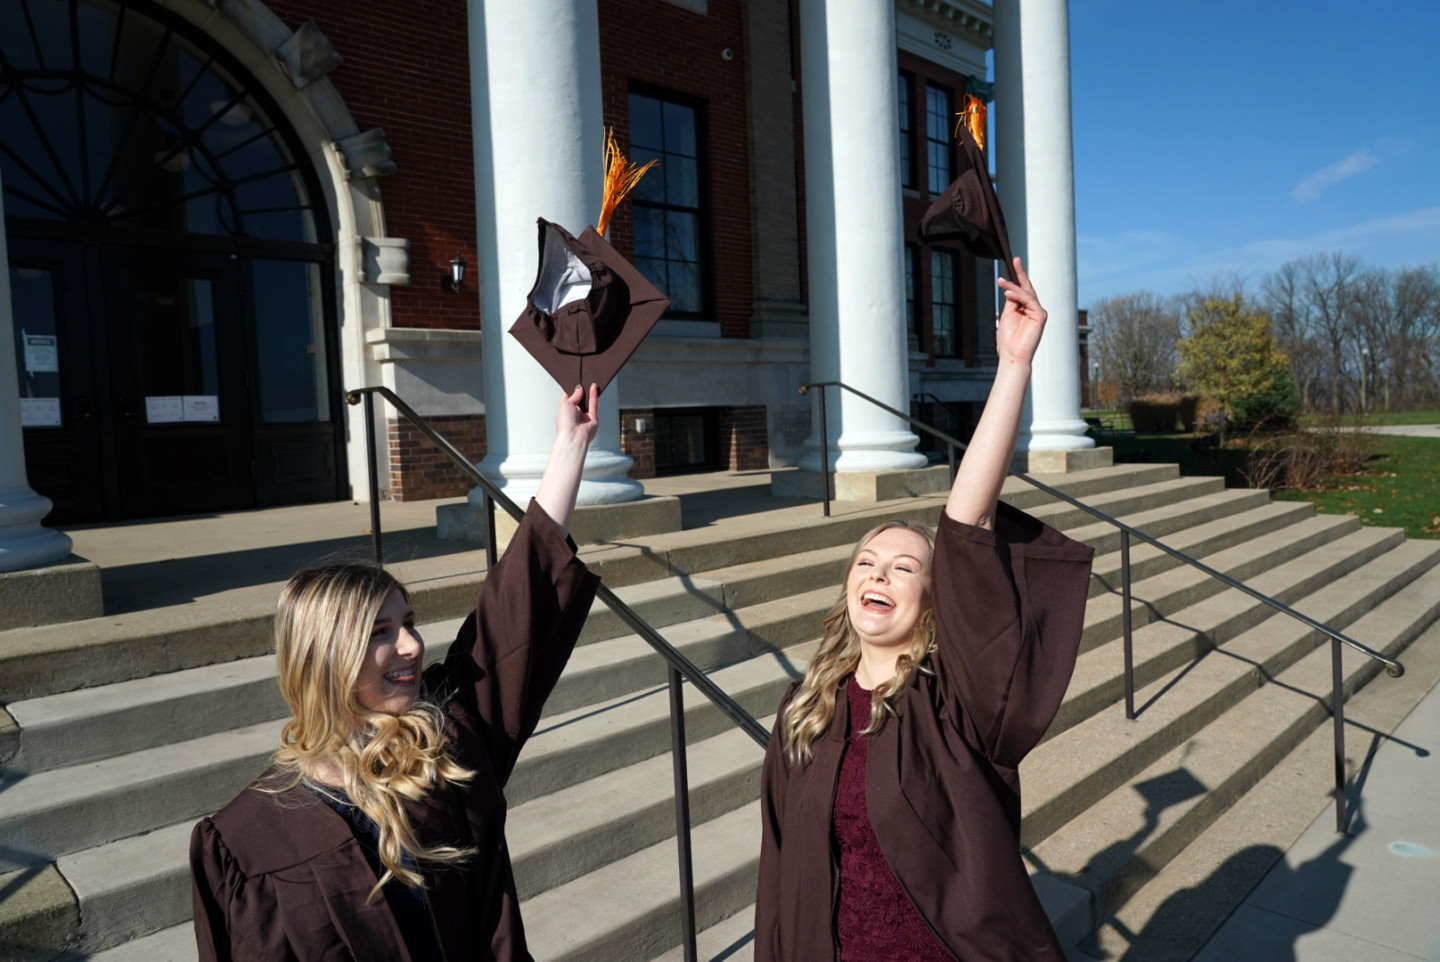 Two graduates wearing their gowns throw their caps into the air.